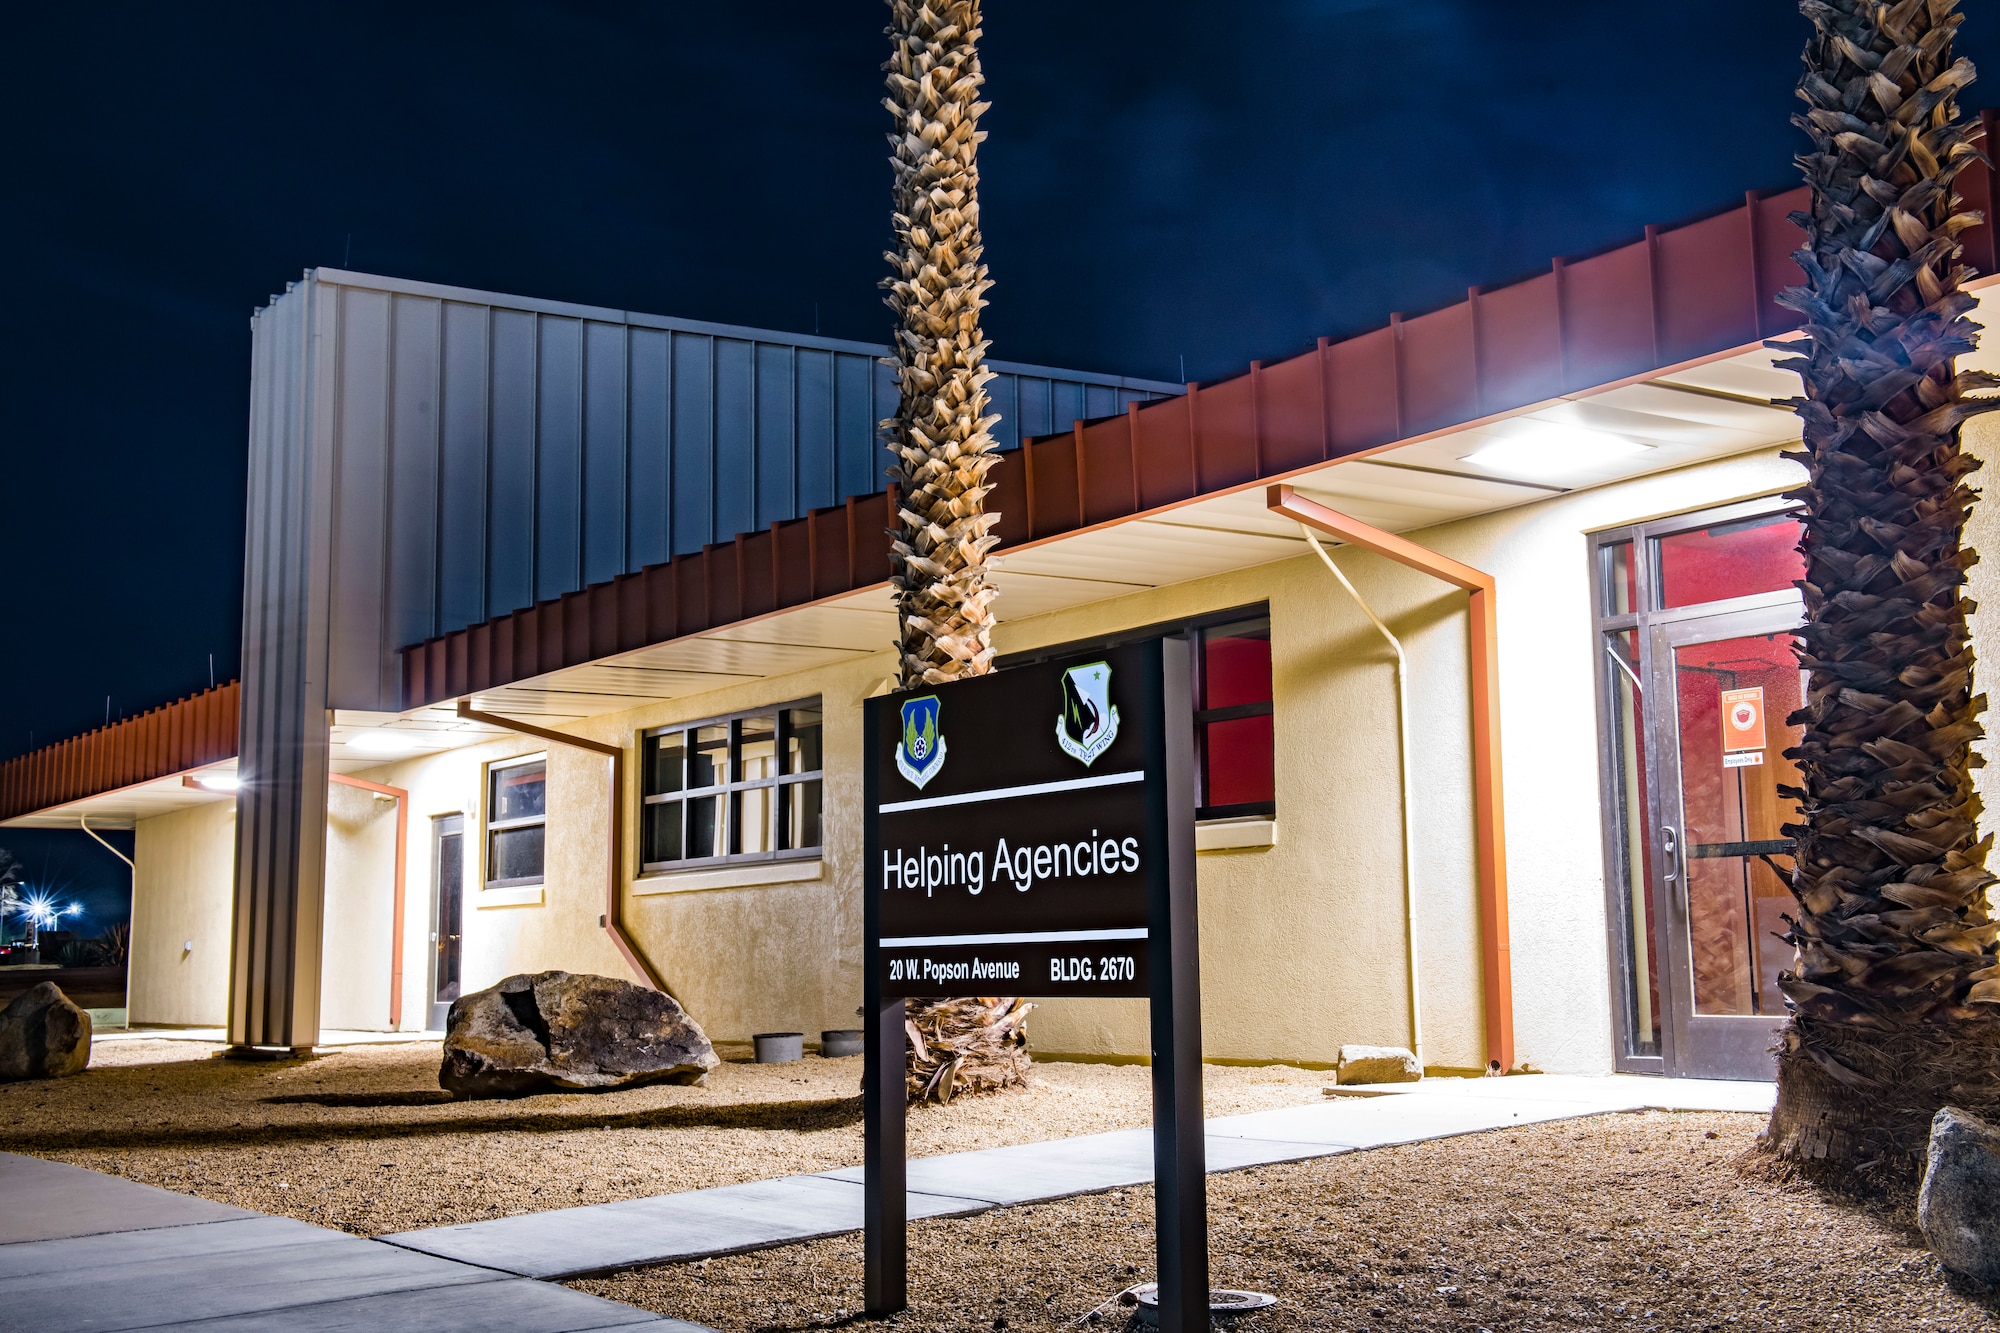 A twilight photograph of the new Helping Agencies facility at Edwards Air Force Base, California.